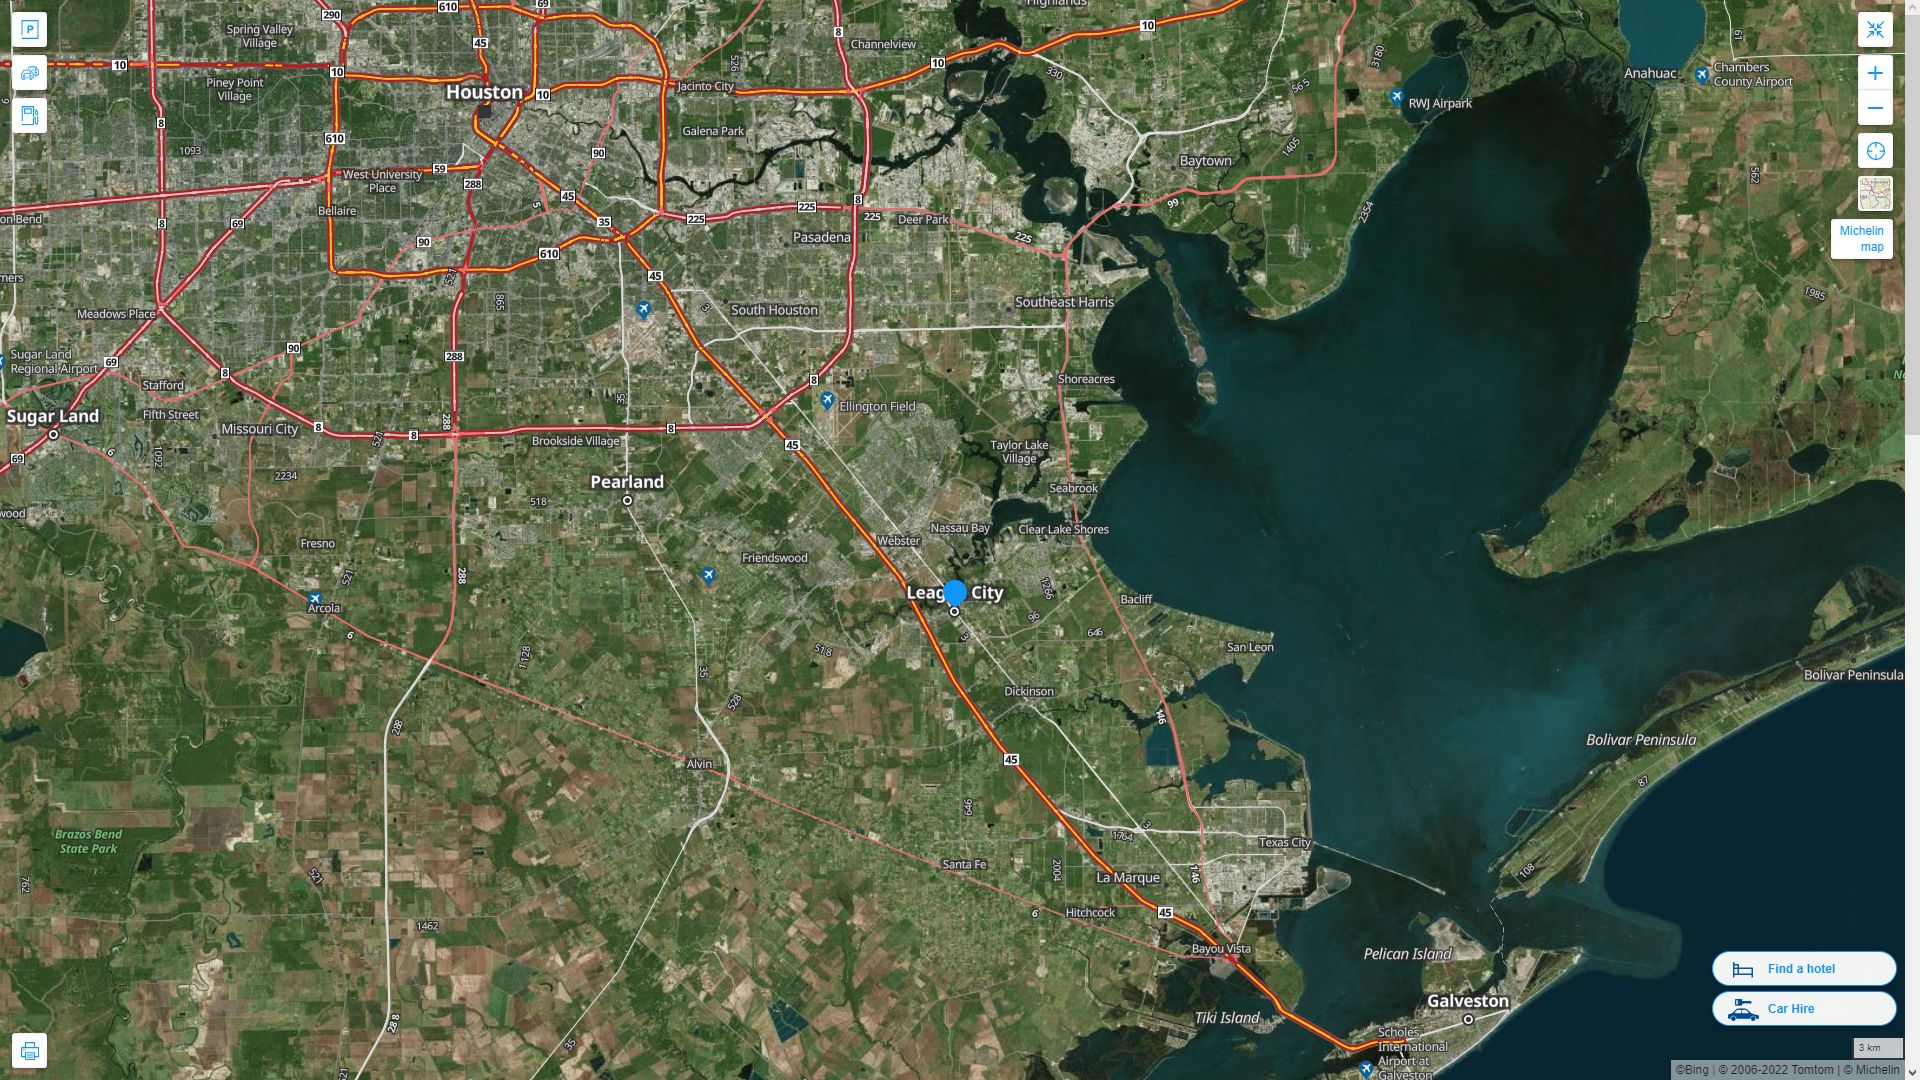 League City Texas Highway and Road Map with Satellite View